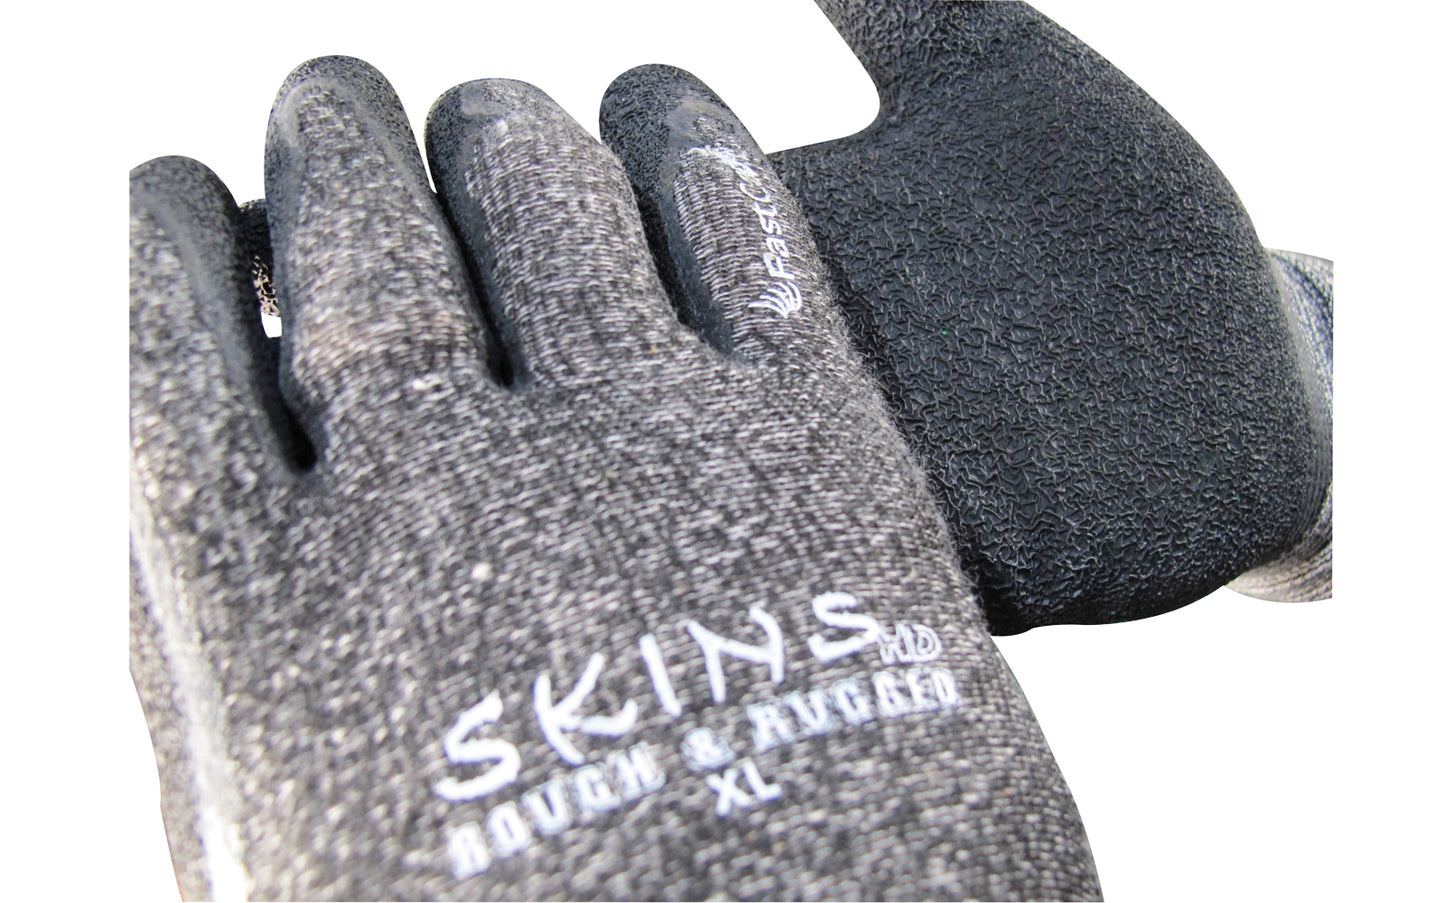 FastCap Skins HD Work Gloves - Latex Coated Palms - Model SKINS HD ~ Excellent for general construction, handling wood lumber & melamine, mill work, glass handling, metal parts, automotive repair & parts assembly